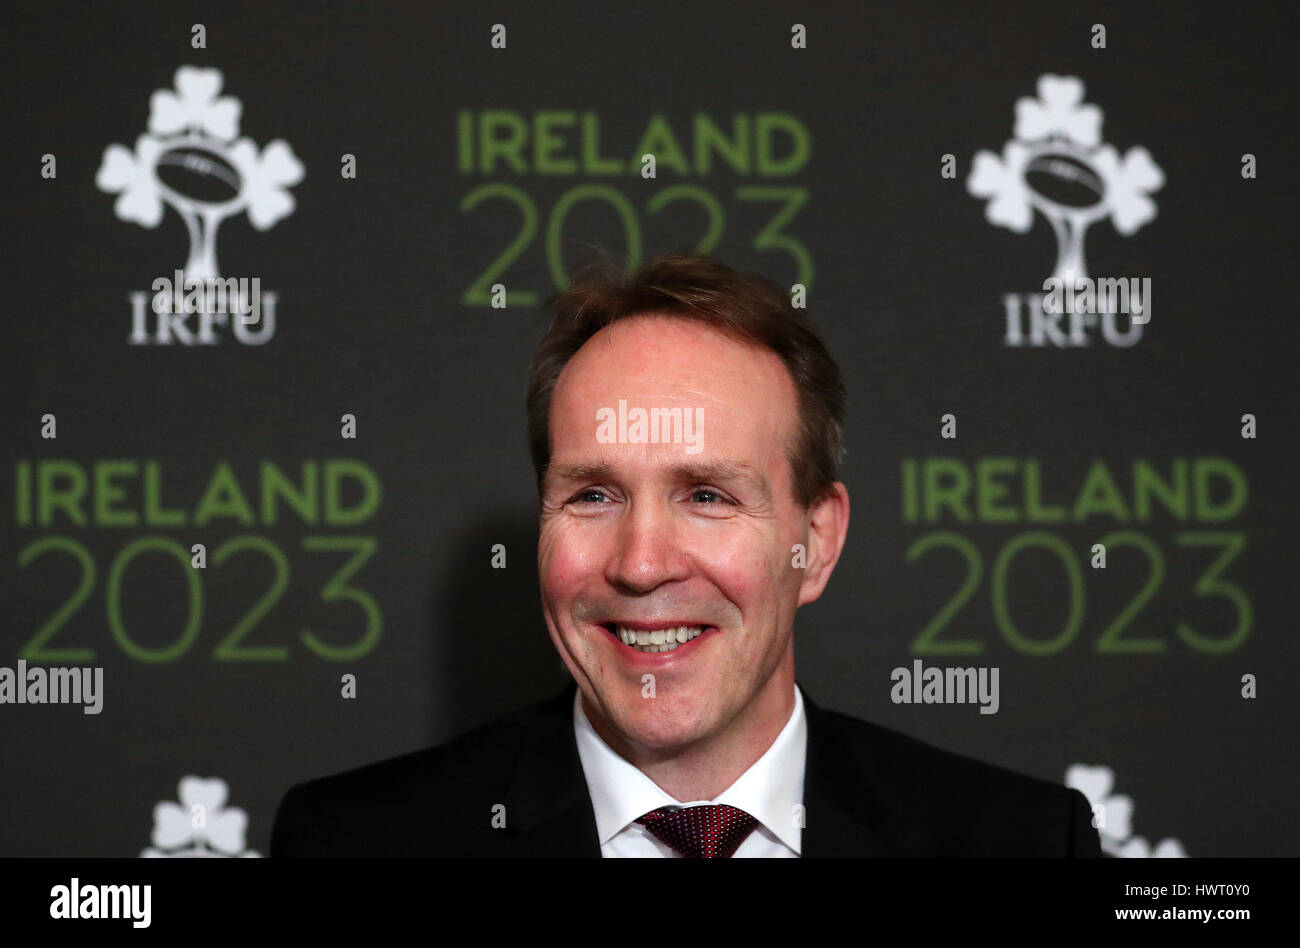 Kevin Potts, Ireland 2023 Oversight Board, during a press conference at The Merrion Hotel, Dublin. Stock Photo